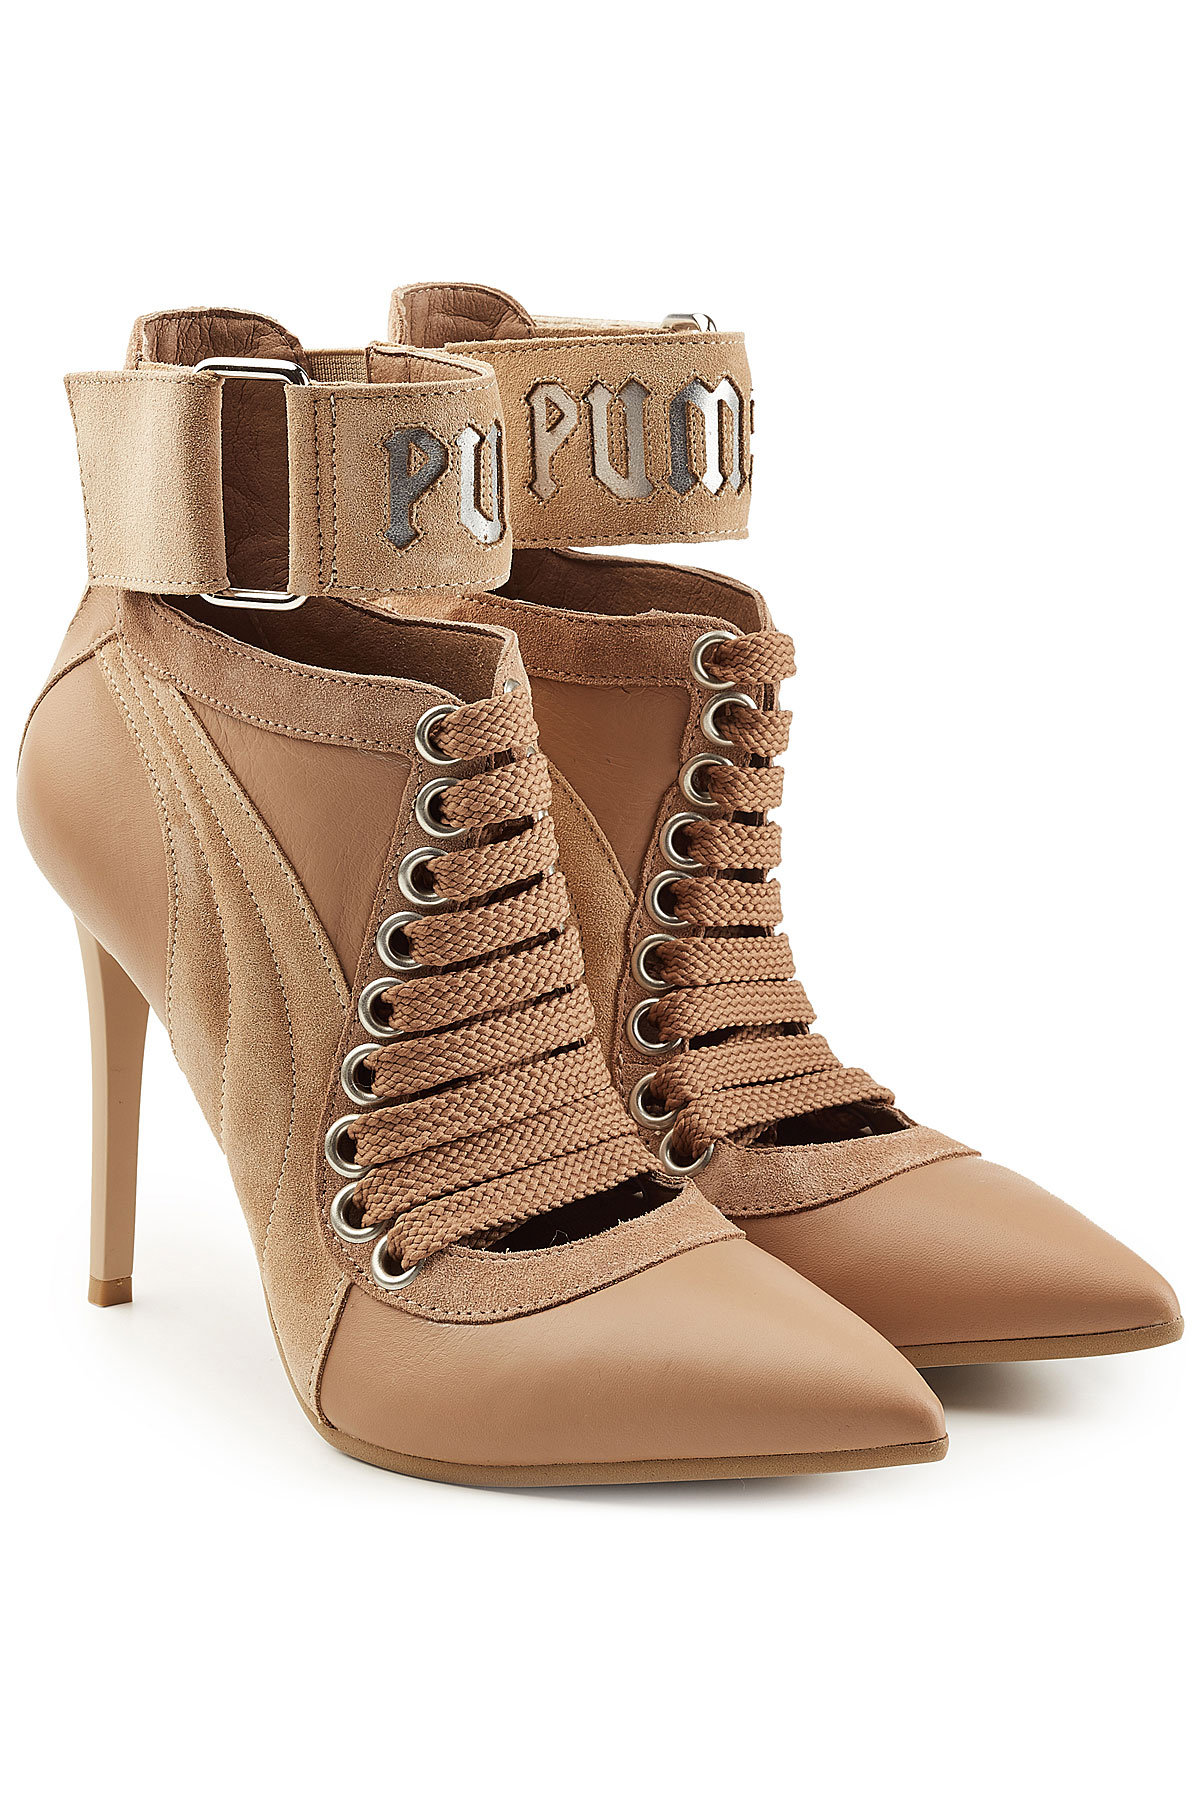 Lace Up Stiletto Boots with Leather and Suede by FENTY Puma by Rihanna